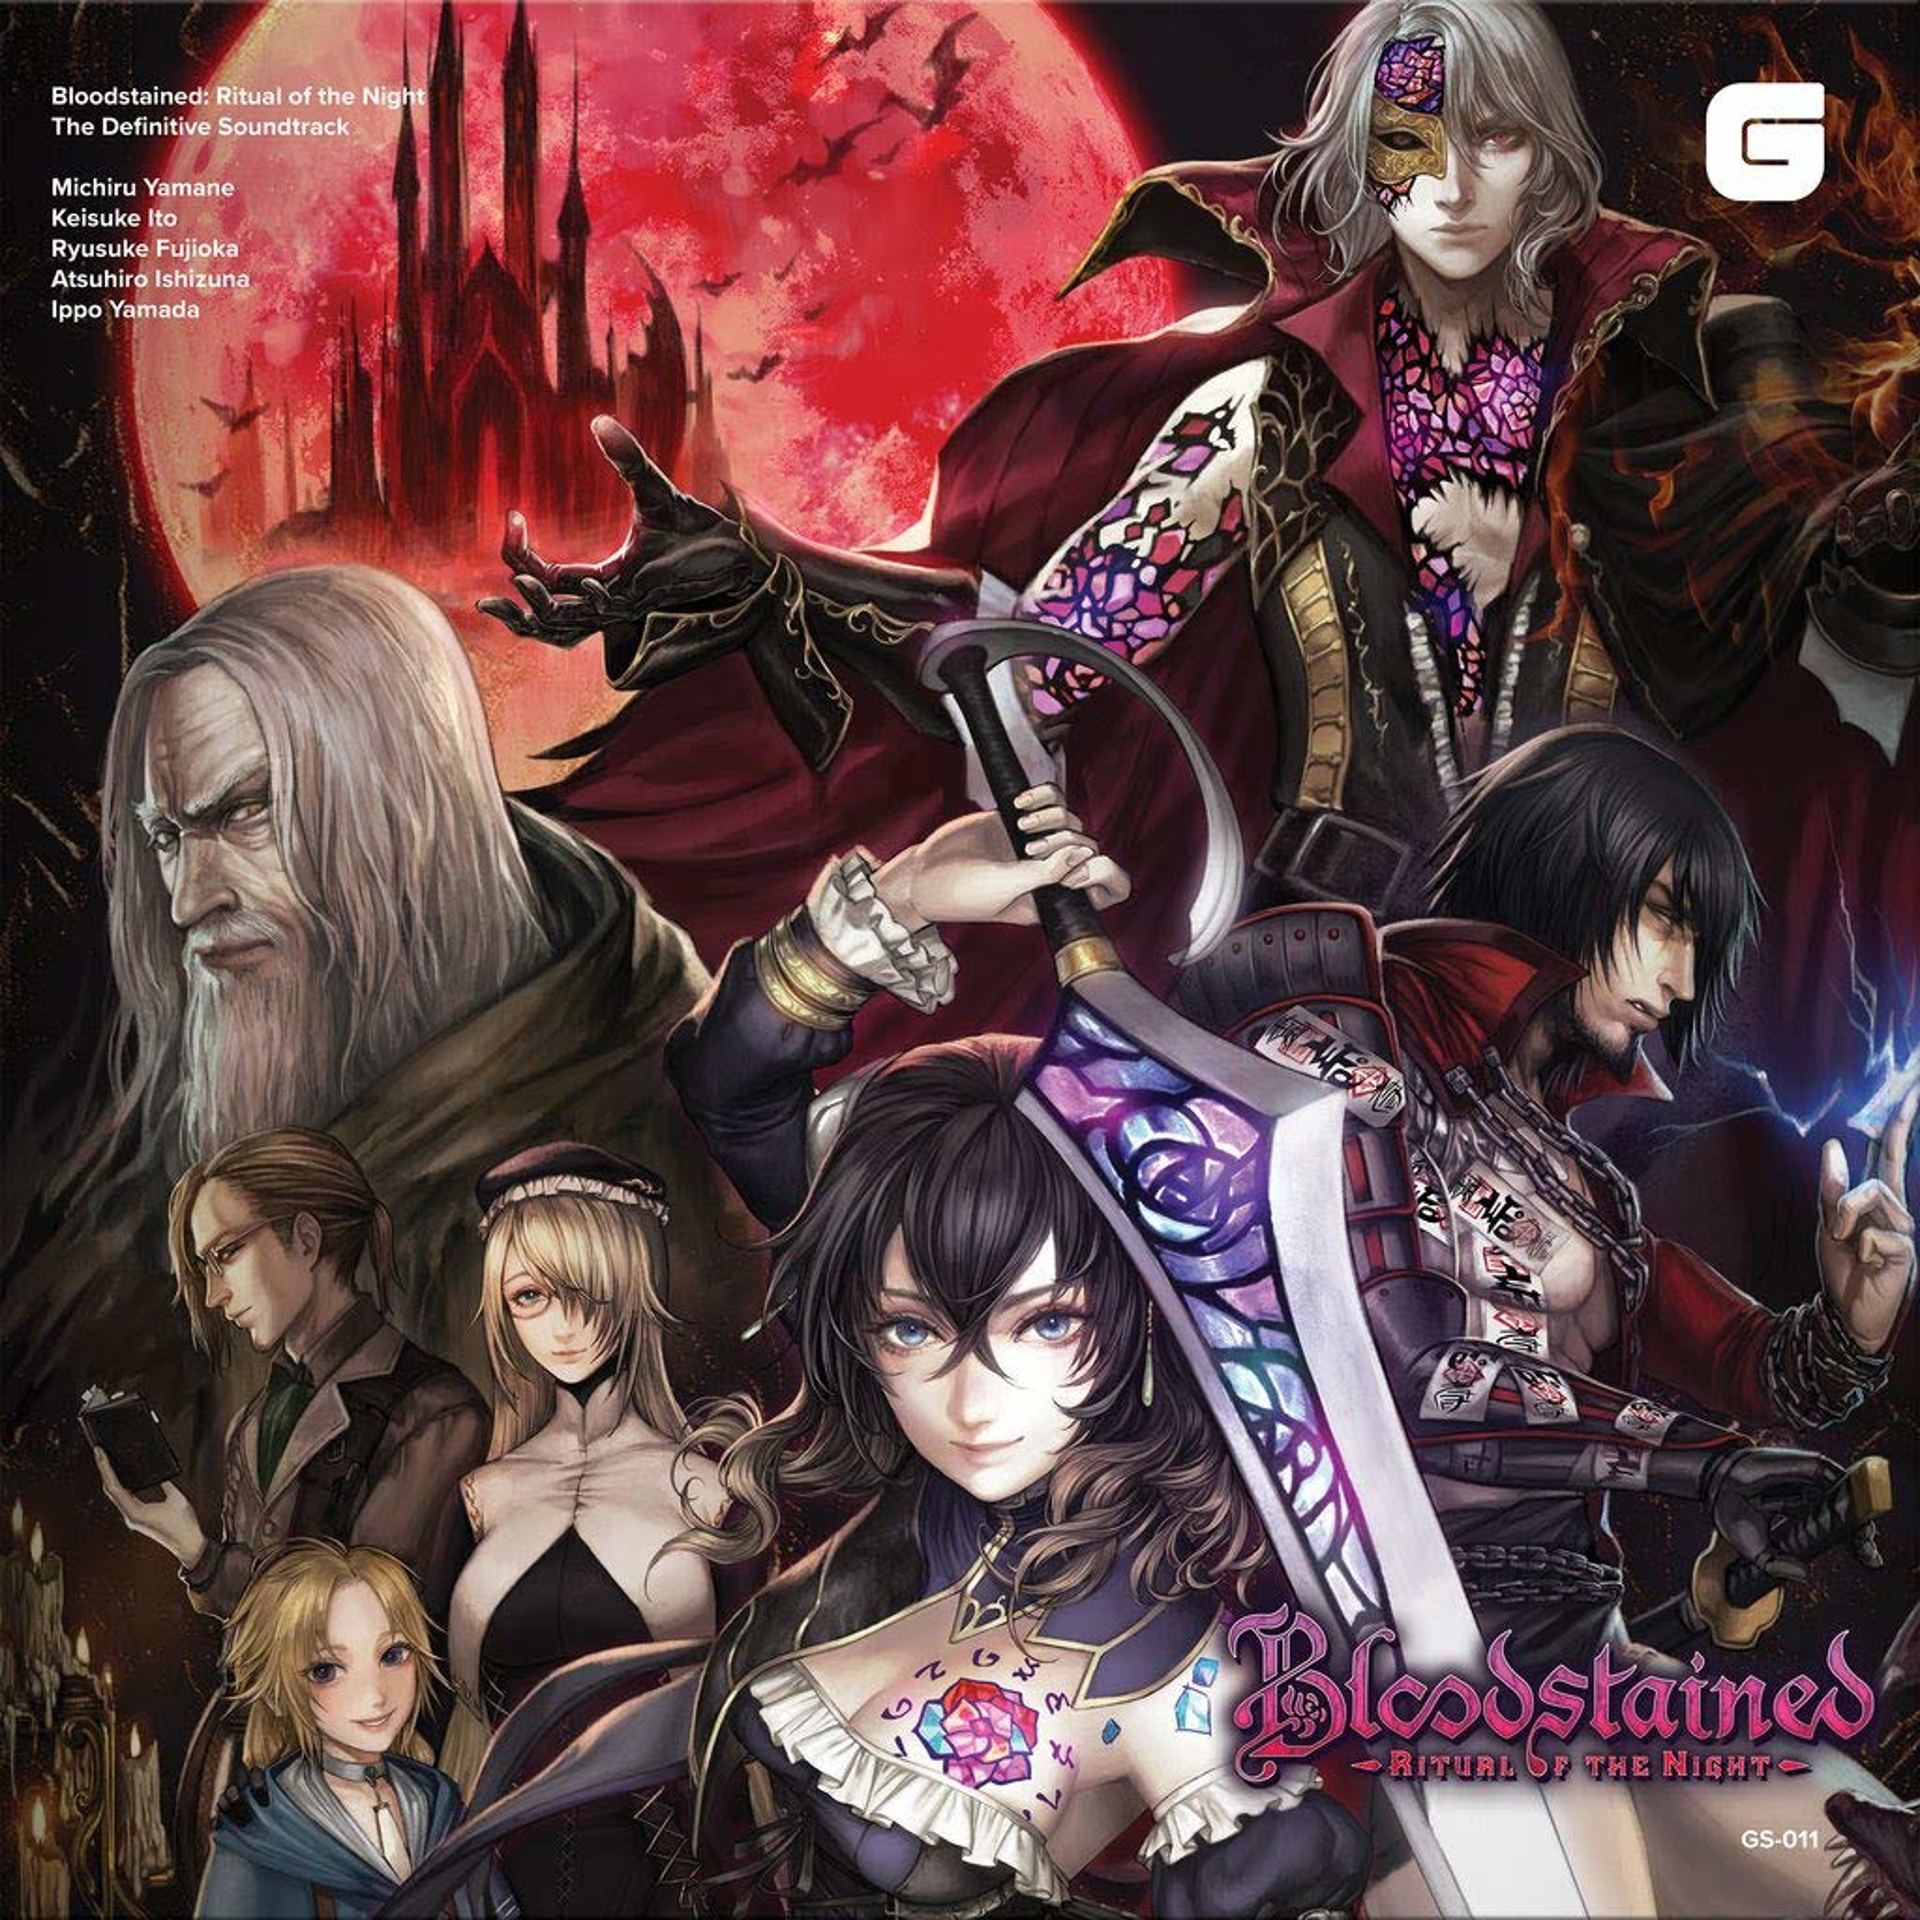 Bloodstained: Ritual of the Night - The Definitive Soundtrack - 4 Black LP